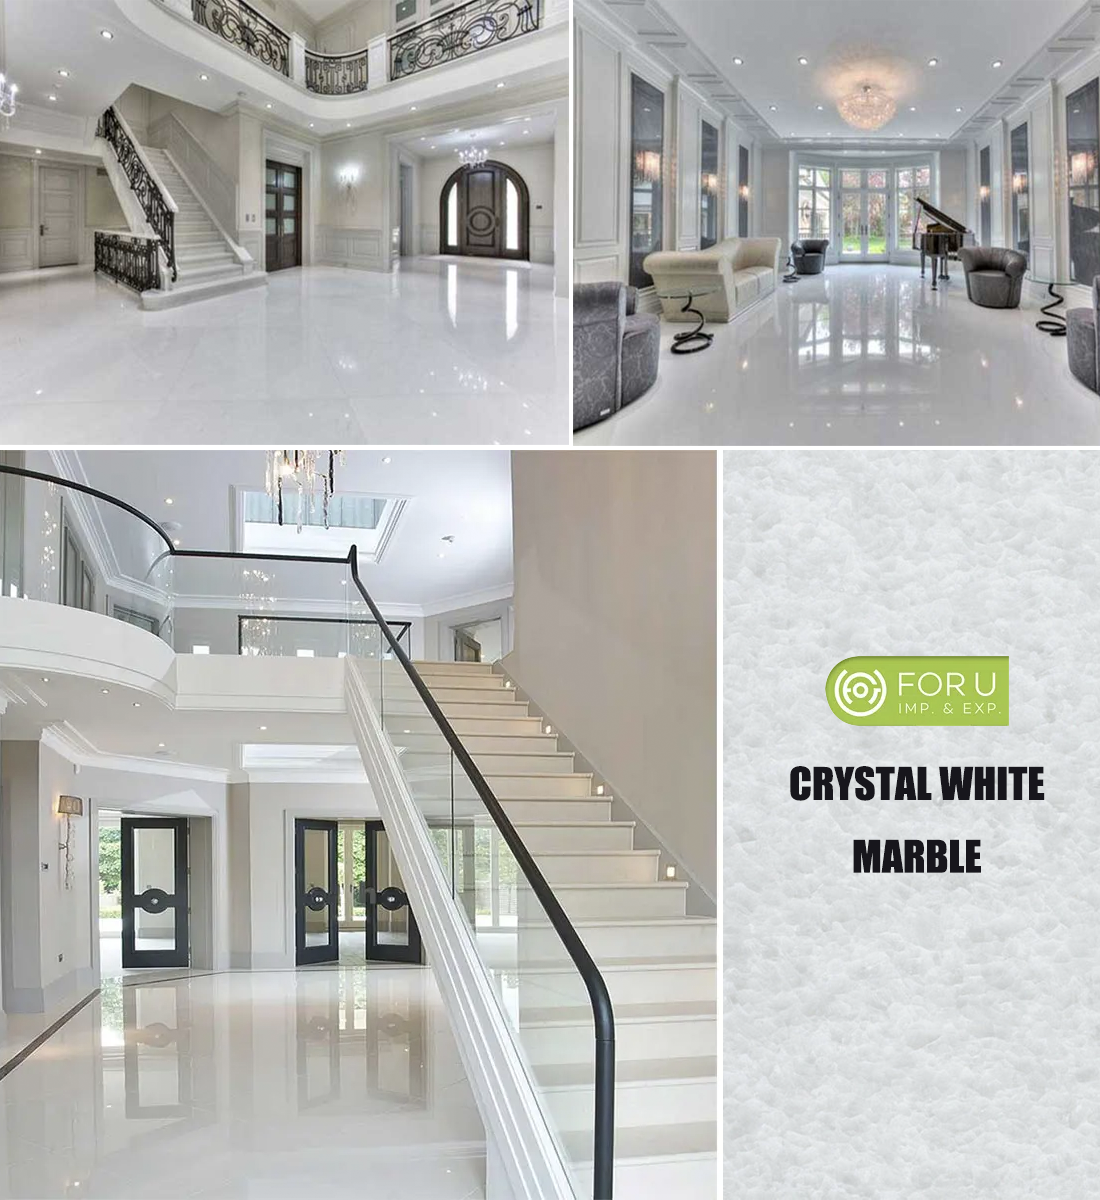 Crystal White Marble Indoor Floor Tiles Projects FOR U STONE